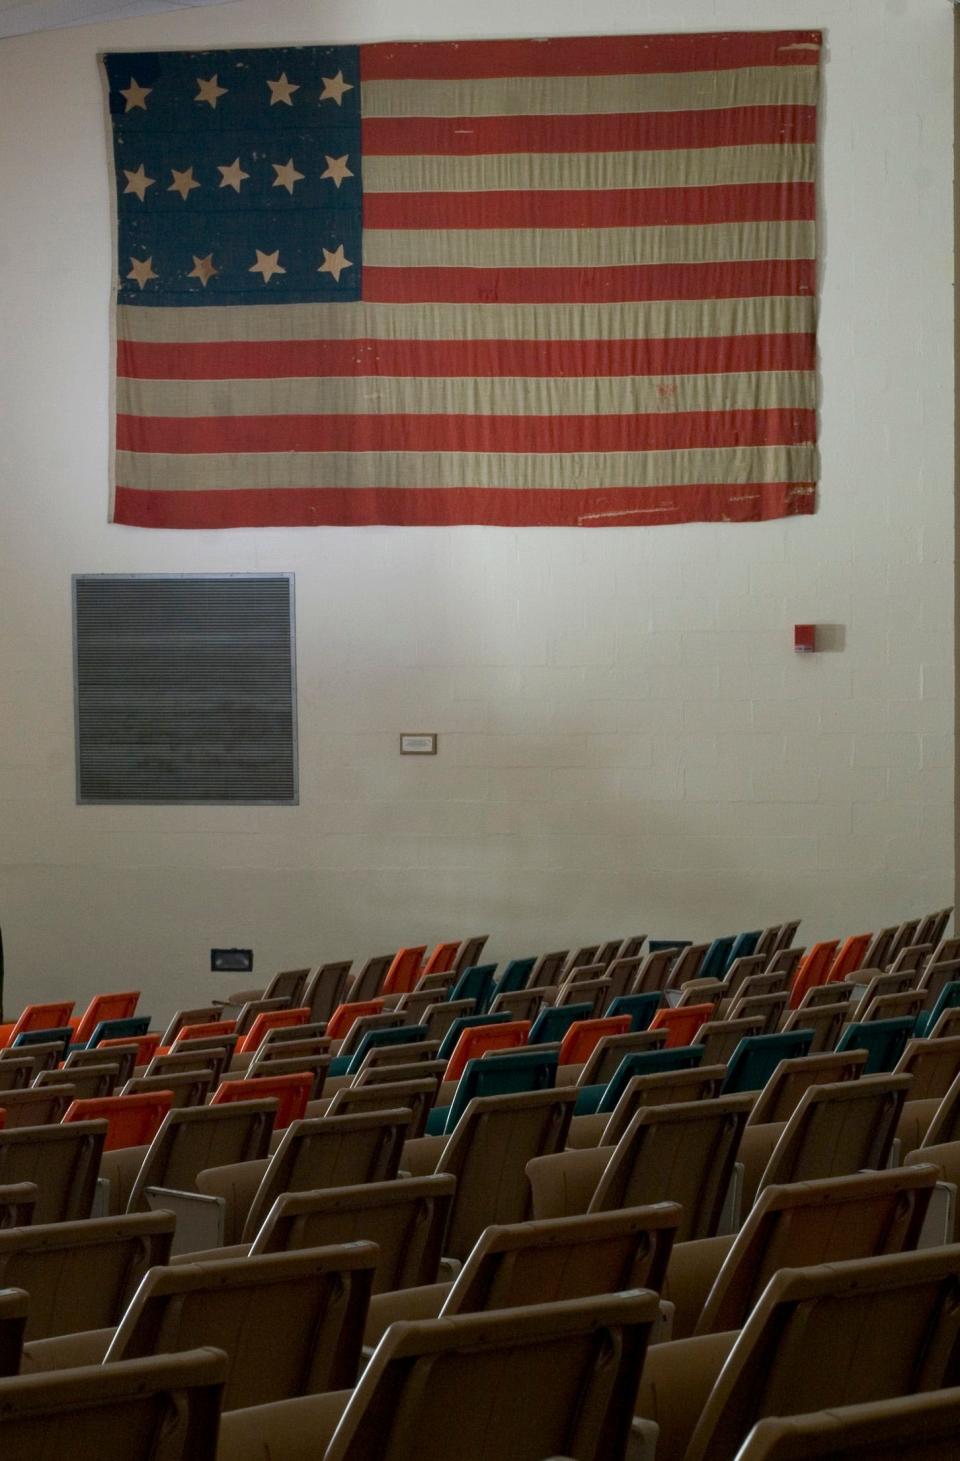 This 13-star flag, which originally belonged to Capt. Bernard O'Neil (1832-1889) was given to Wixon Middle School in 1970 and was later restored in 2014. File photo, 2004.